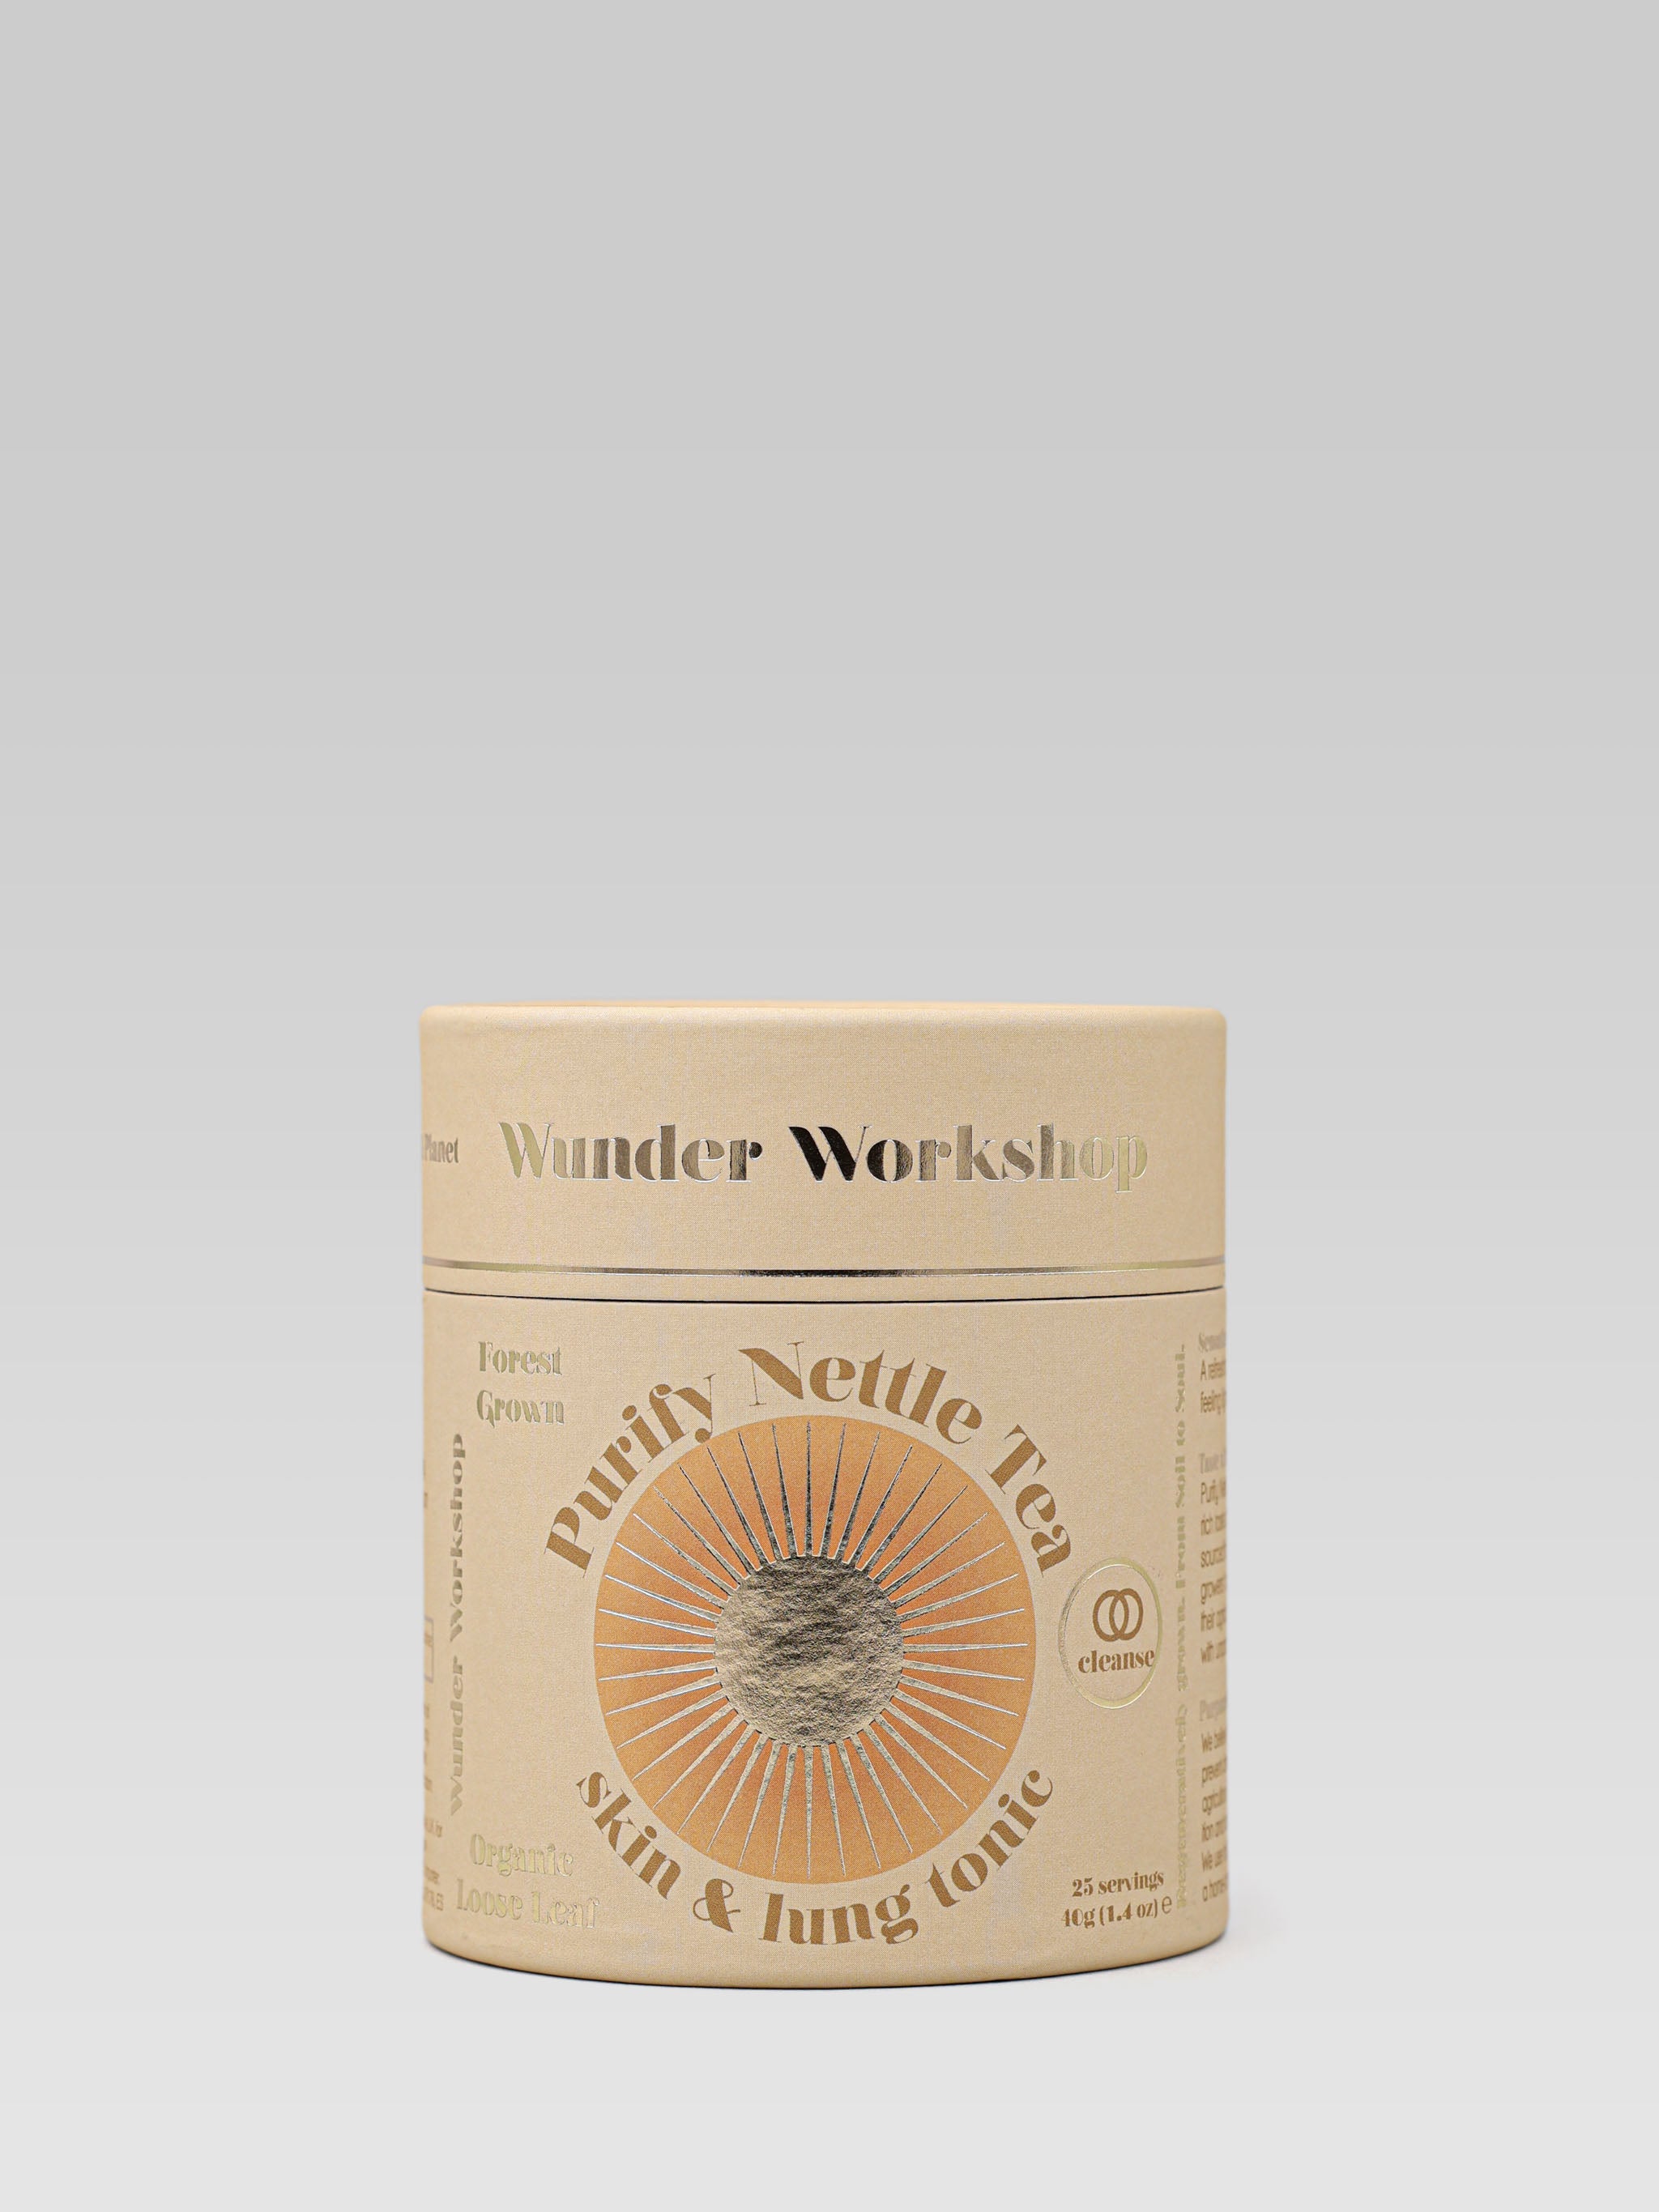 WUNDER WORKSHOP Purify Tea Skin and Lung Tonic